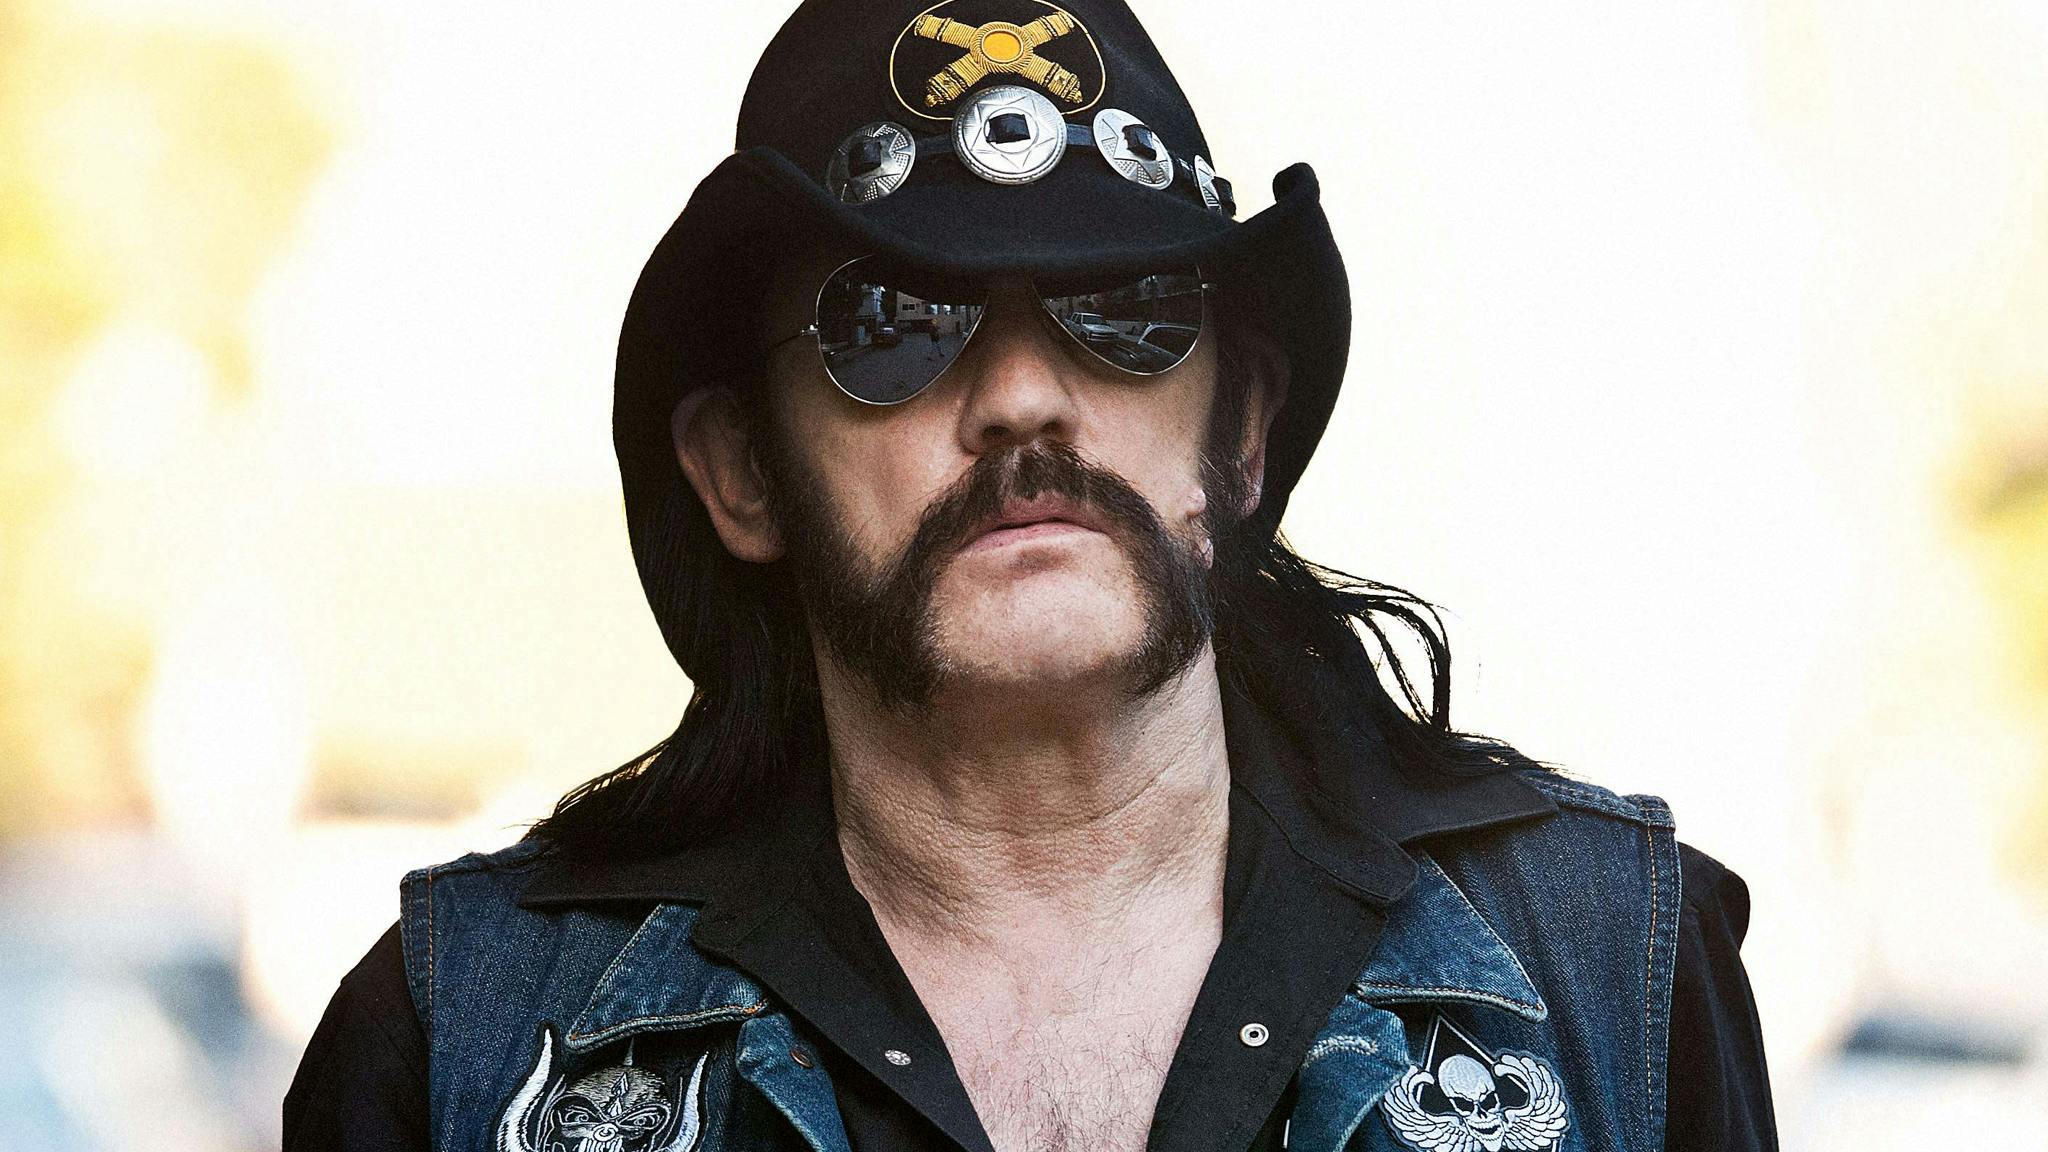 Lemmy’s ashes will be housed at one of his “most loved places”, Bloodstock